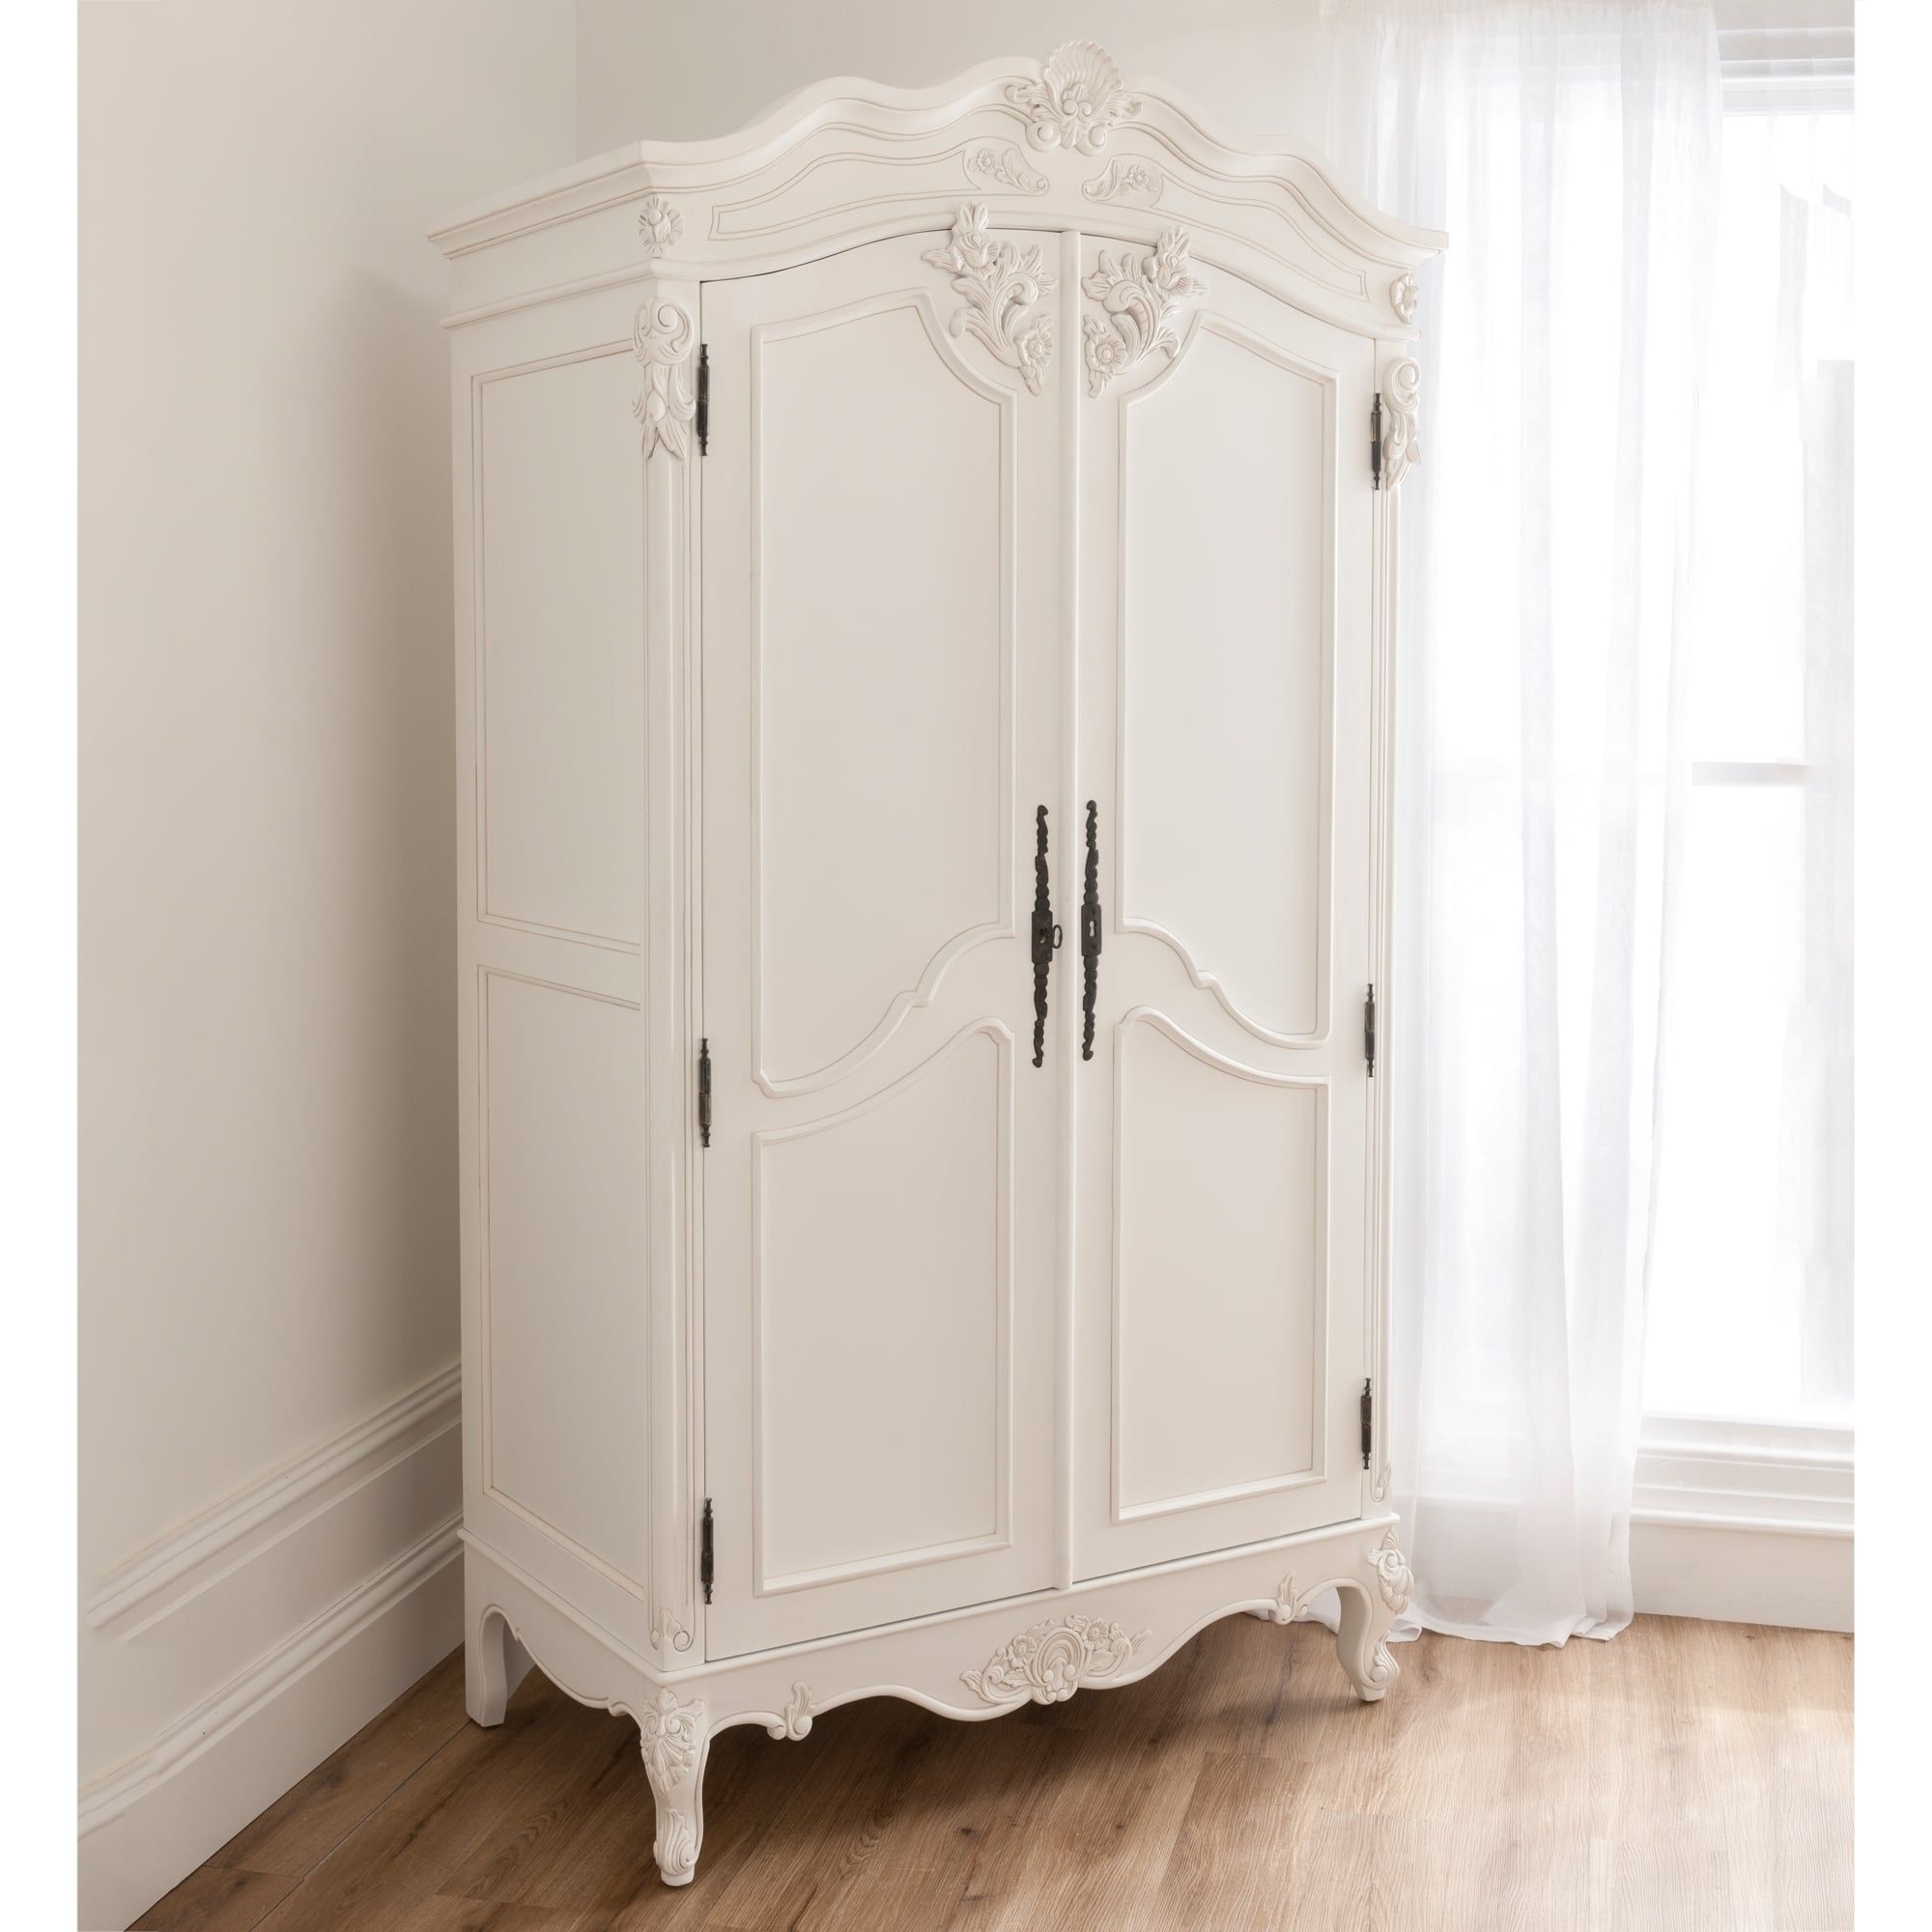 Most Recent Baroque Antique French Wardrobe Is Available Online From Throughout Silver French Wardrobes (View 12 of 15)